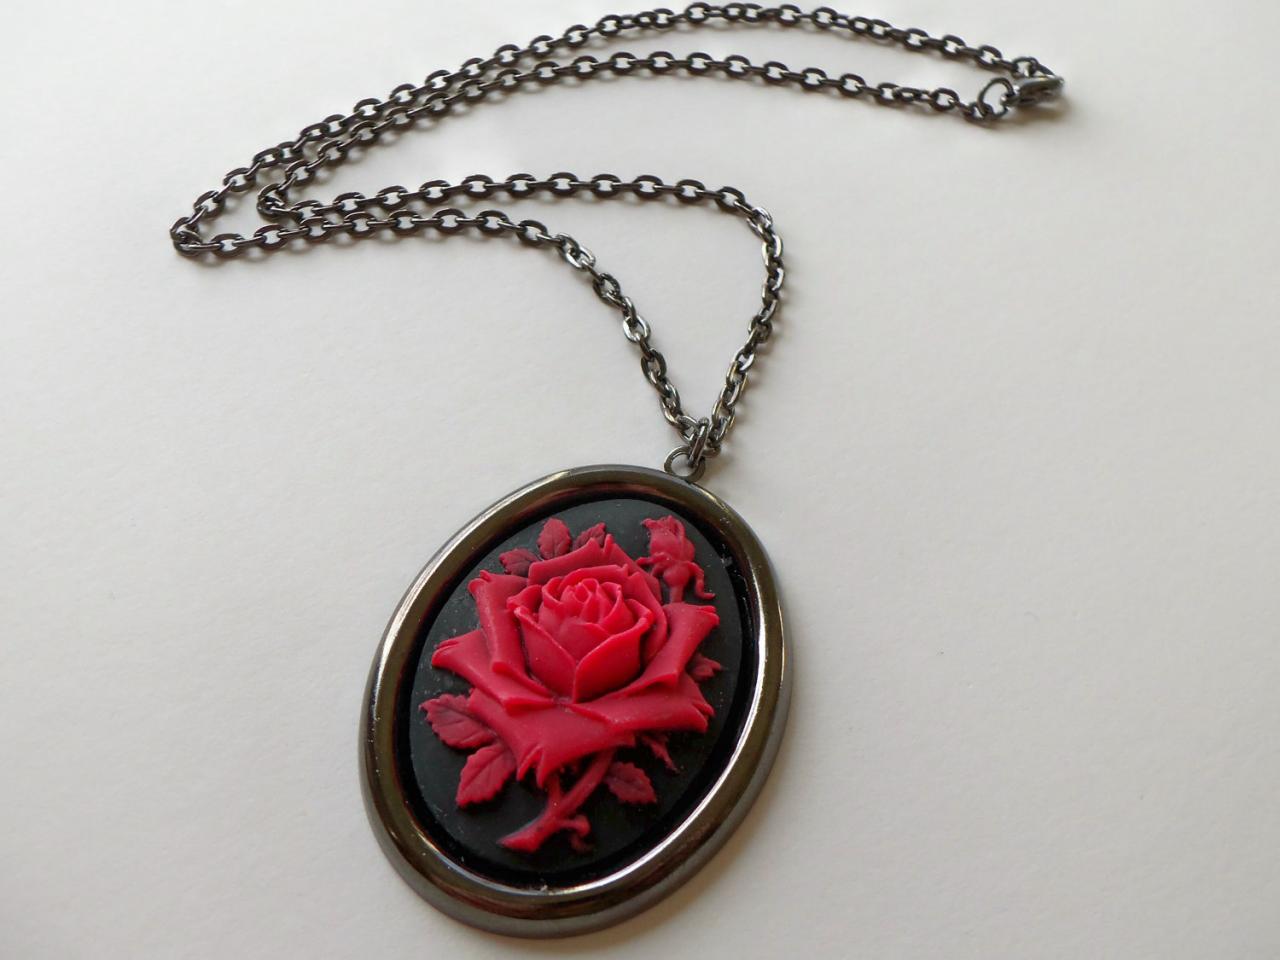 Rose Pendant Necklace Victorian Style Necklace Rose Cameo Black Jewelry Red Necklace Red Rose Jewelry Rose Pendant Necklace